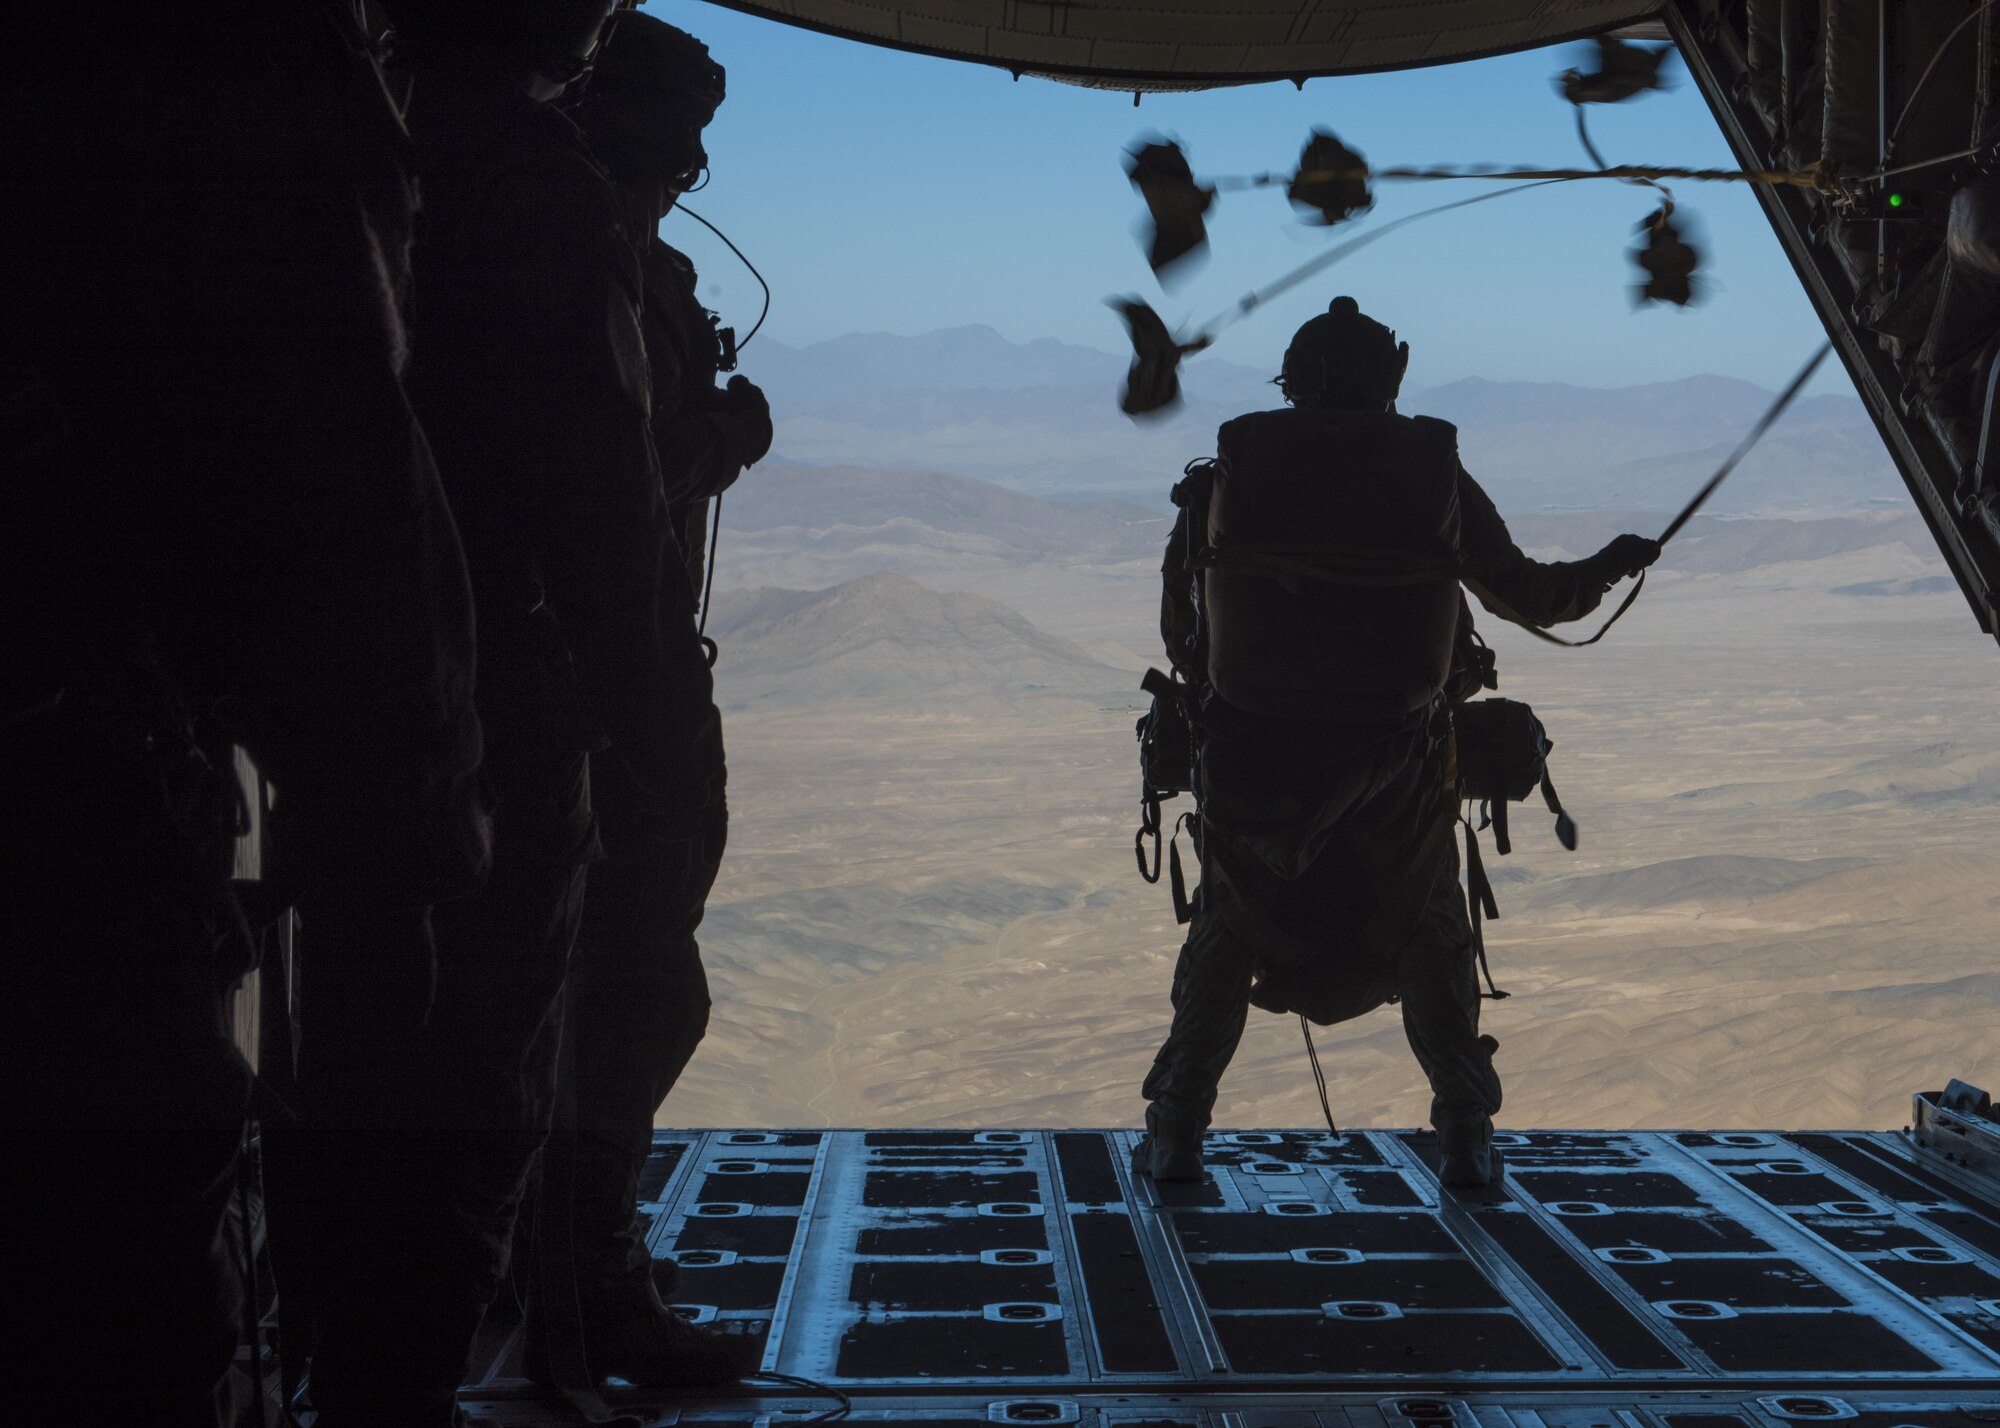 Staff Sgt. Benjamin Cole, 83rd Expeditionary Rescue Squadron pararescueman, prepares to jump off a C-130J Super Hercules ramp during a recovery exercise, Bagram Airfield, Afghanistan, Sept. 03, 2016. The 83rd ERQS participates in a real world scenario exercises in order to maintain readiness standards and demonstrate theater personnel recovery capabilities. (U.S. Air Force photo by Senior Airman Justyn M. Freeman)